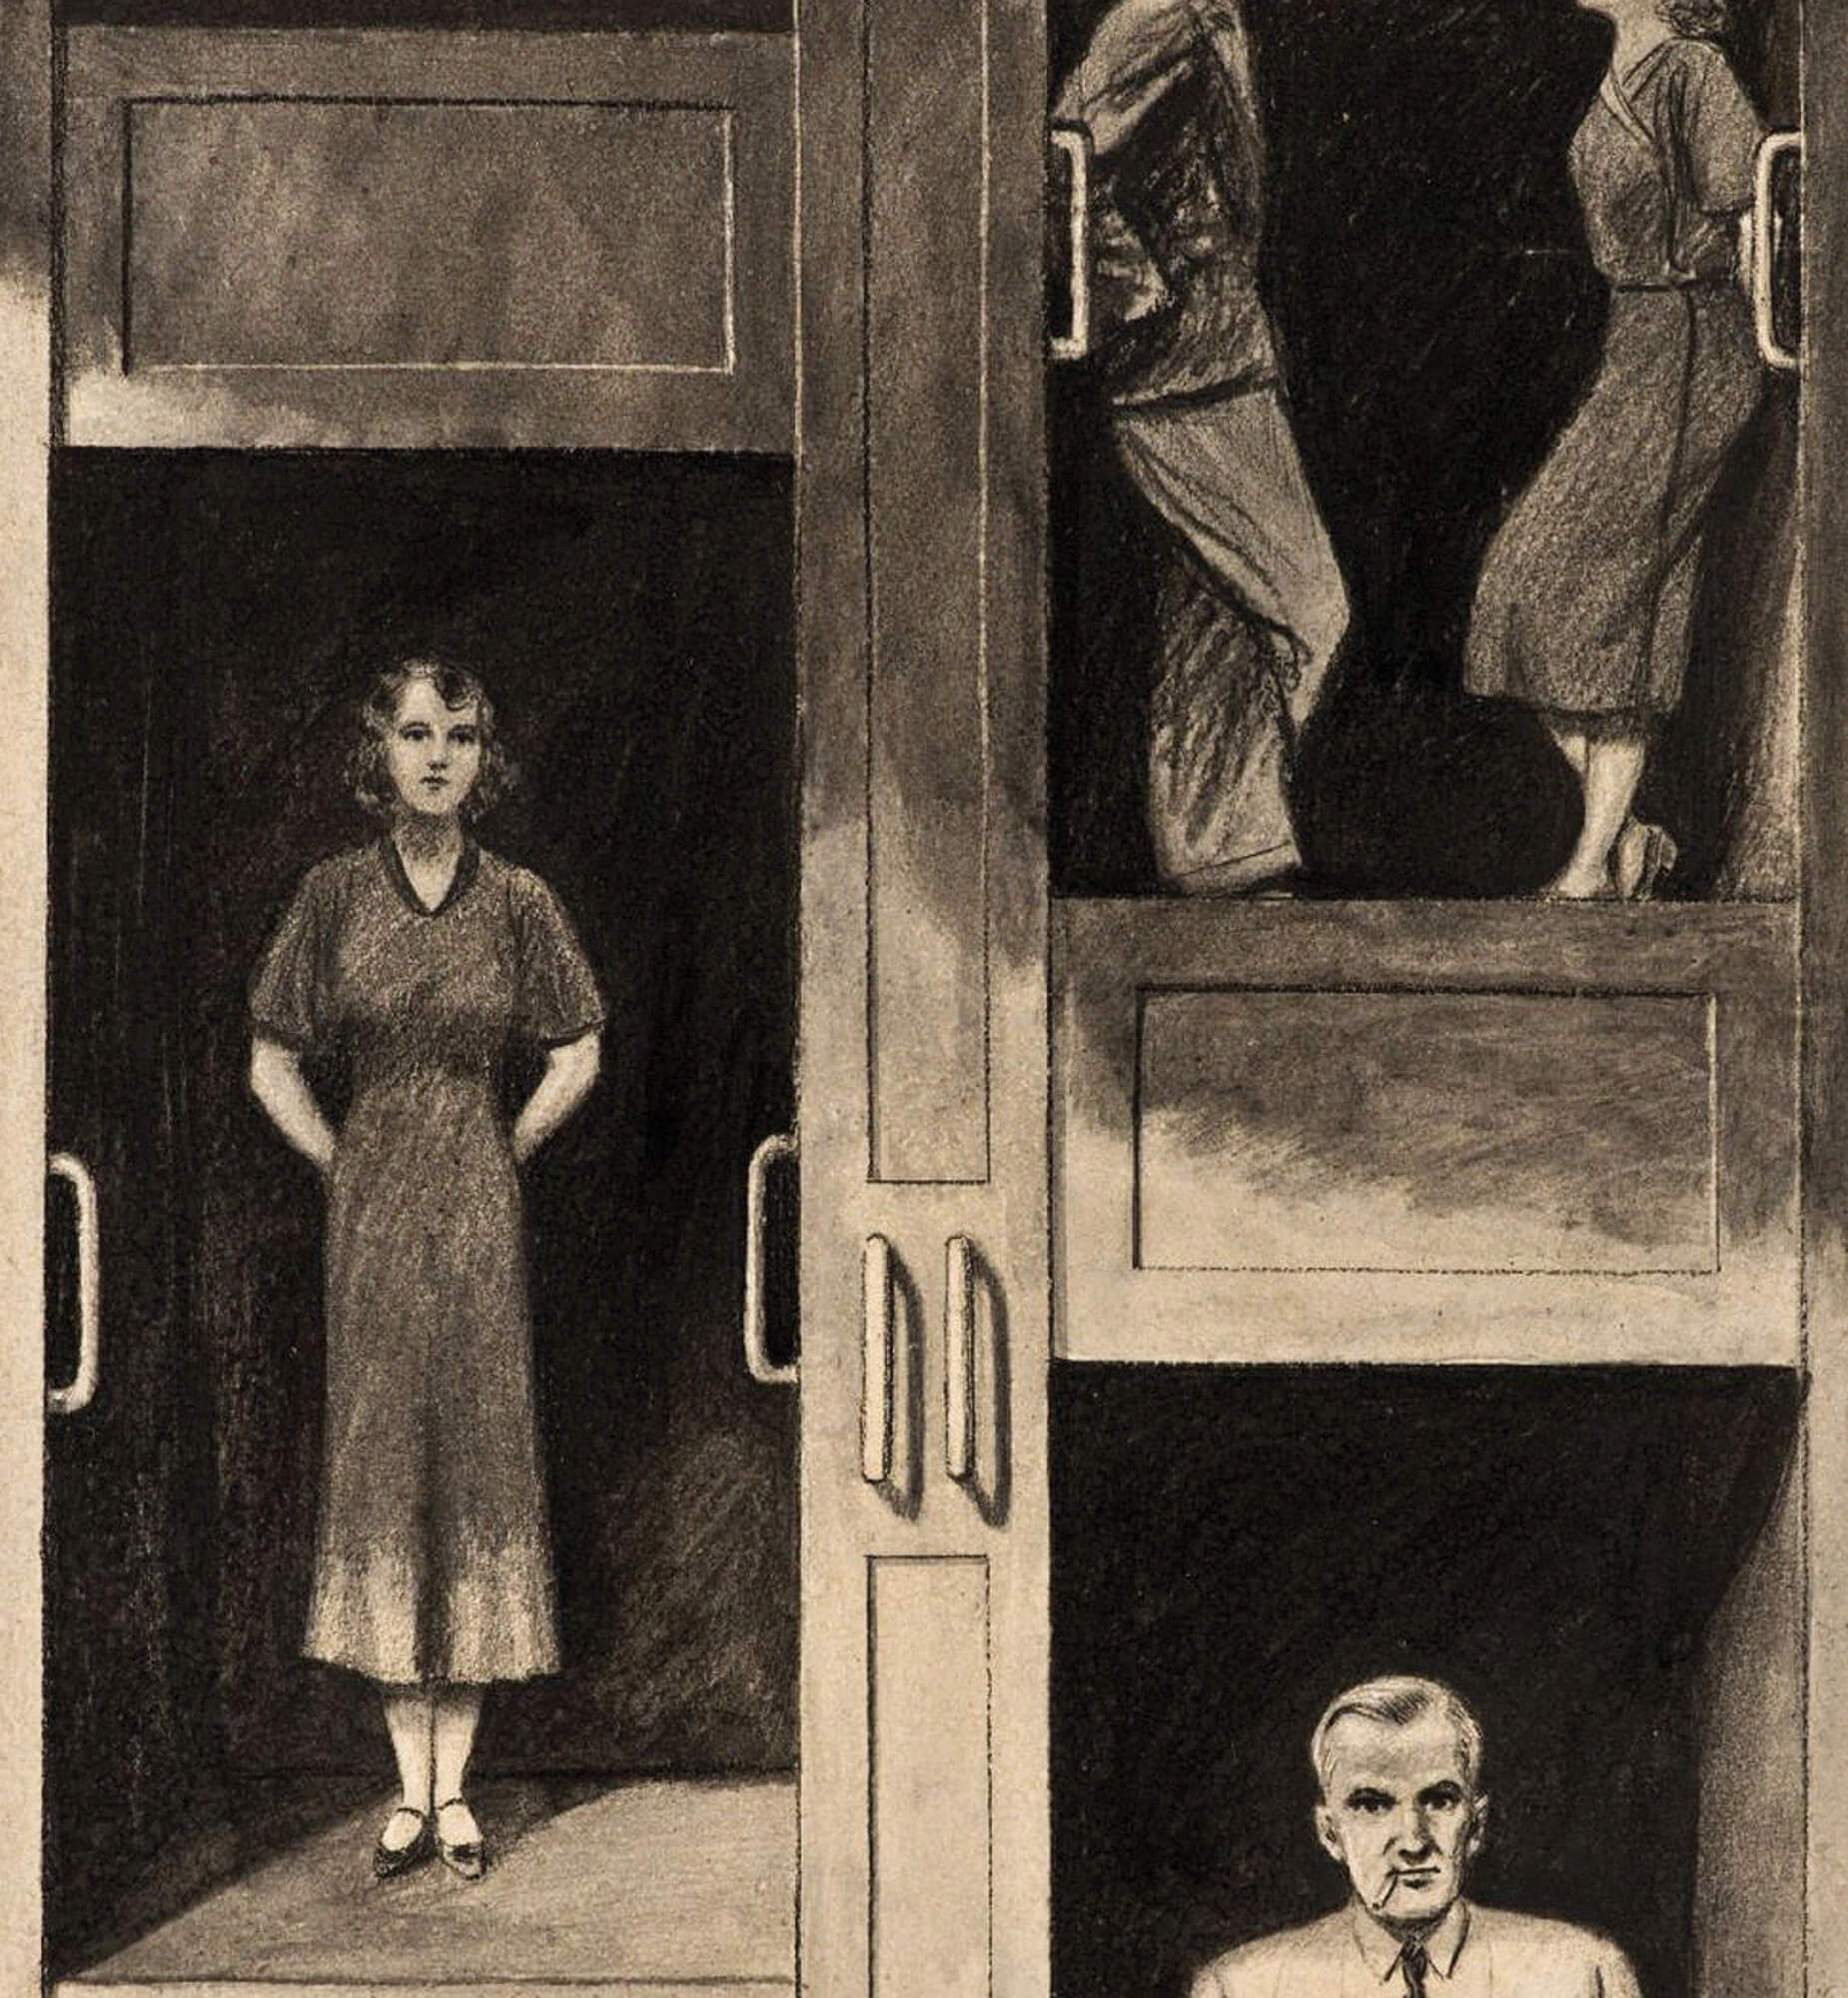 A nineteen twenty eight illustration of a paternoster elevator in use by various individuals.